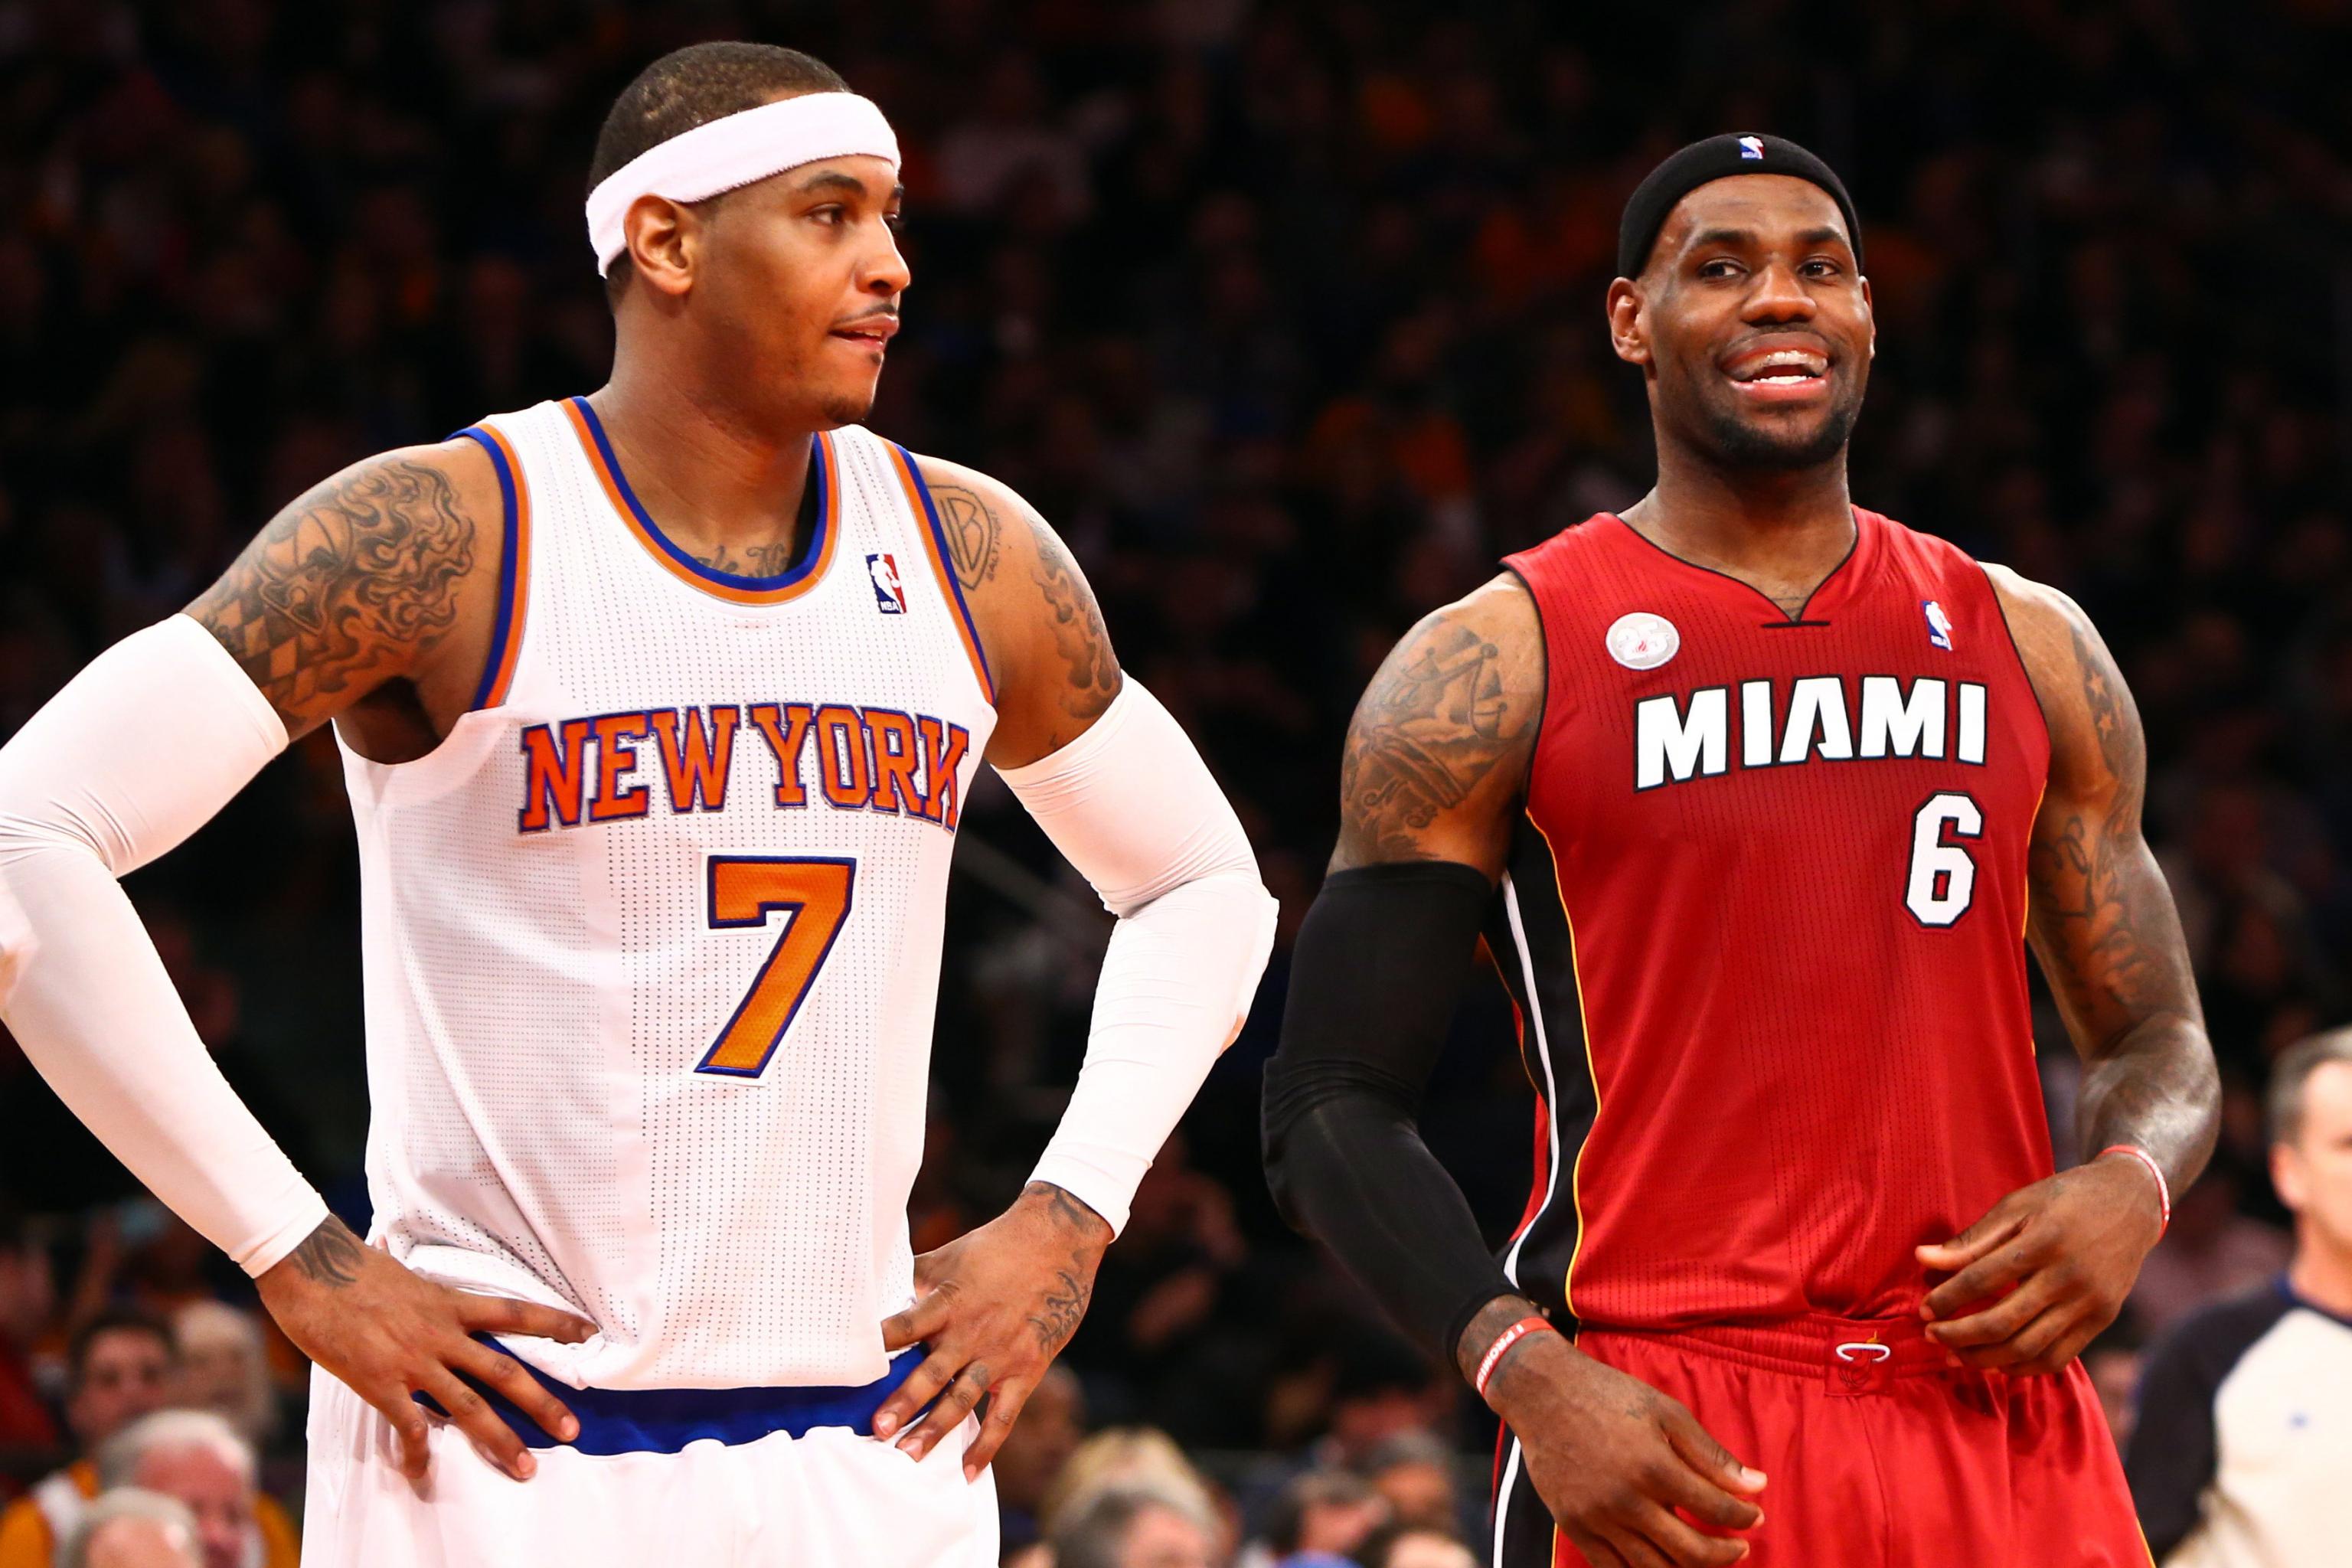 LeBron James, Carmelo Anthony and Sons Pose Together in Viral Photo After  Basketball Game